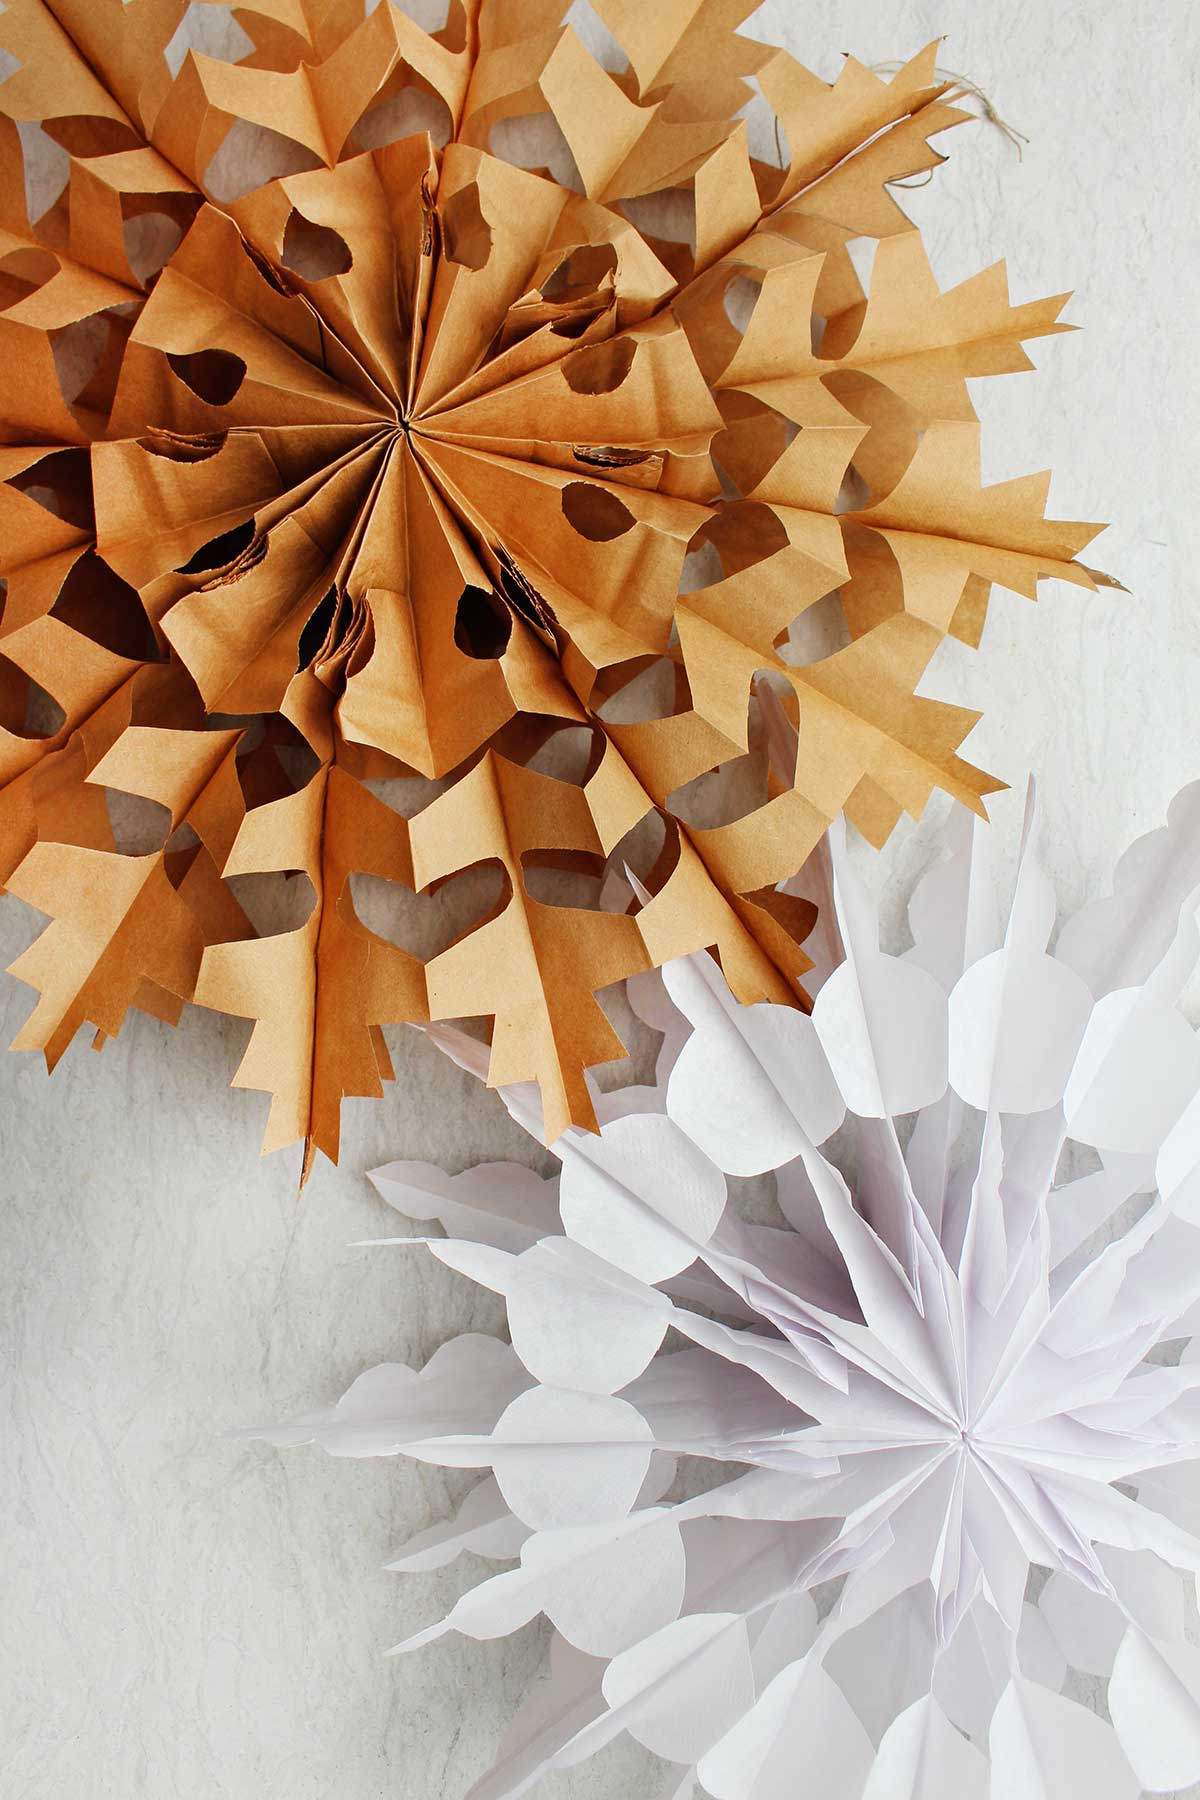 One-of-a-Kind Snowflake Craft